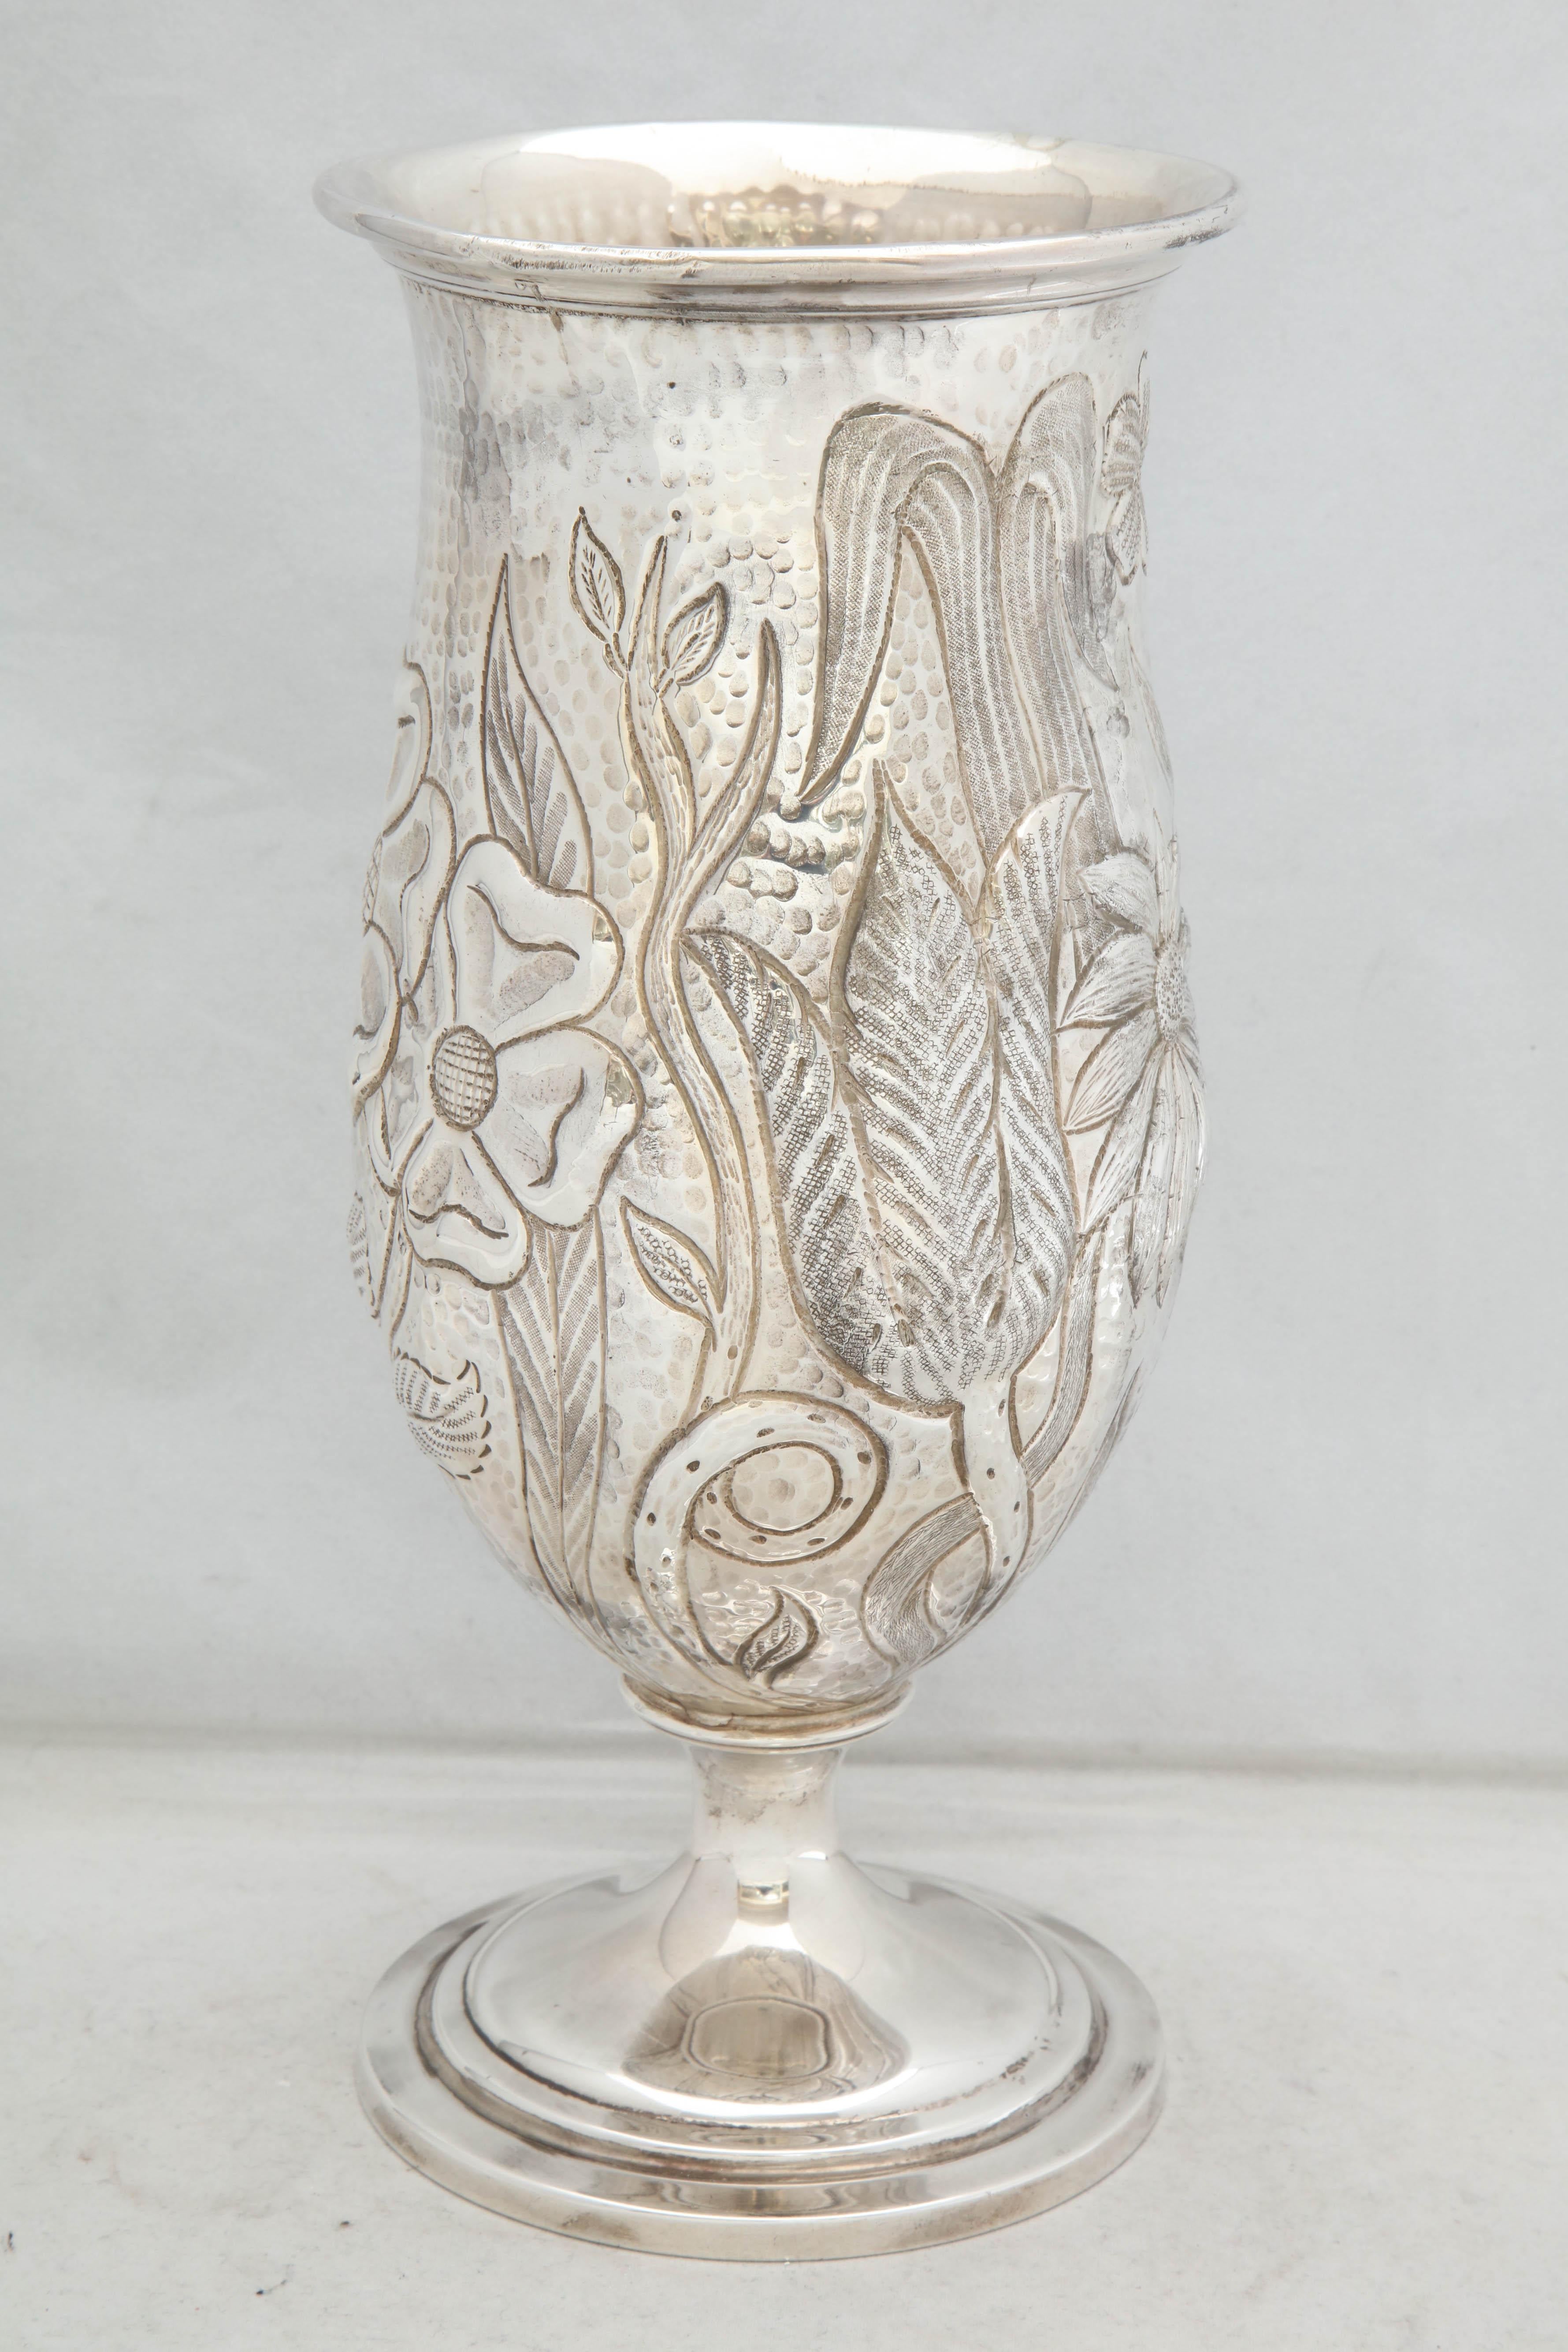 Art Nouveau-Style, sterling silver, pedestal-based vase, Gorham Mfg. Company, Providence, Rhode Island, year-hallmarked for 1923. Hammered in design and chased with flowers. Measures: 10 1/2 inches high x 4 3/4 inches diameter across opening x 4 1/2